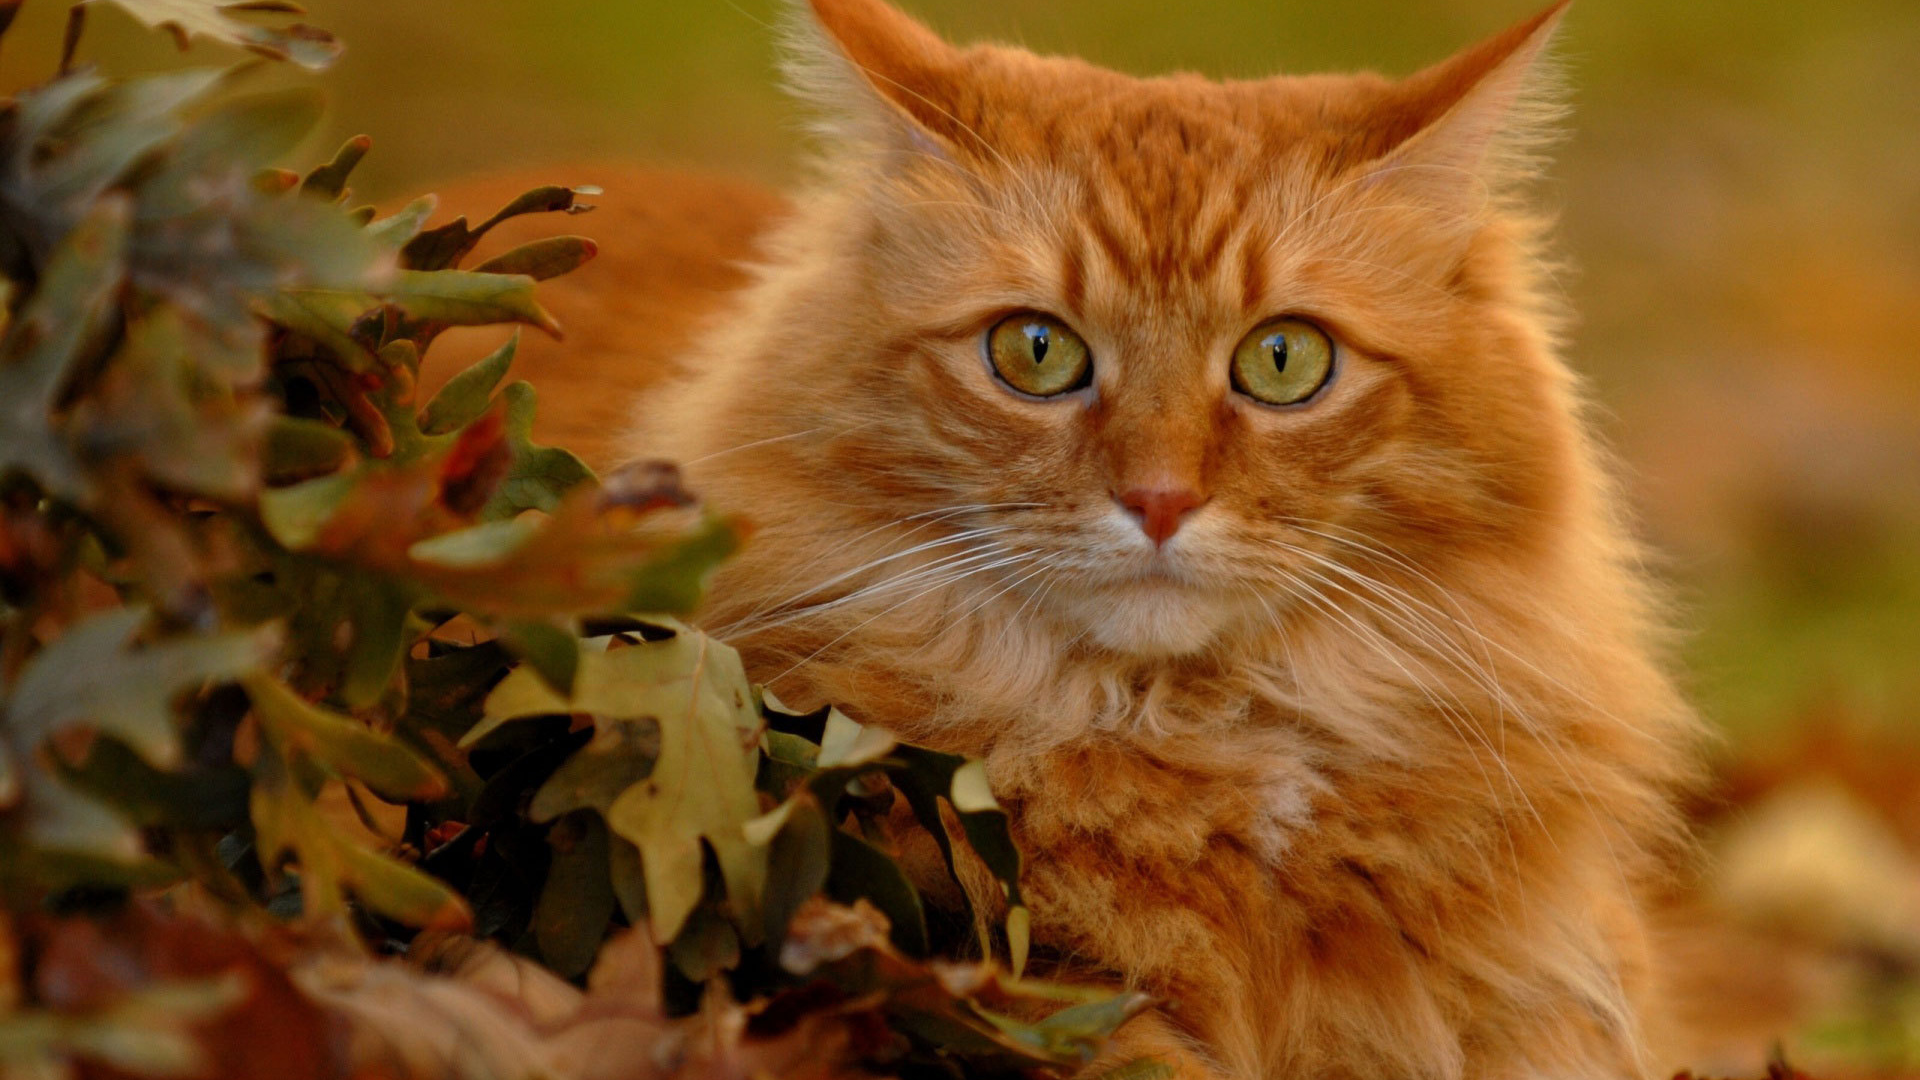 Red Cat in autumn leaves